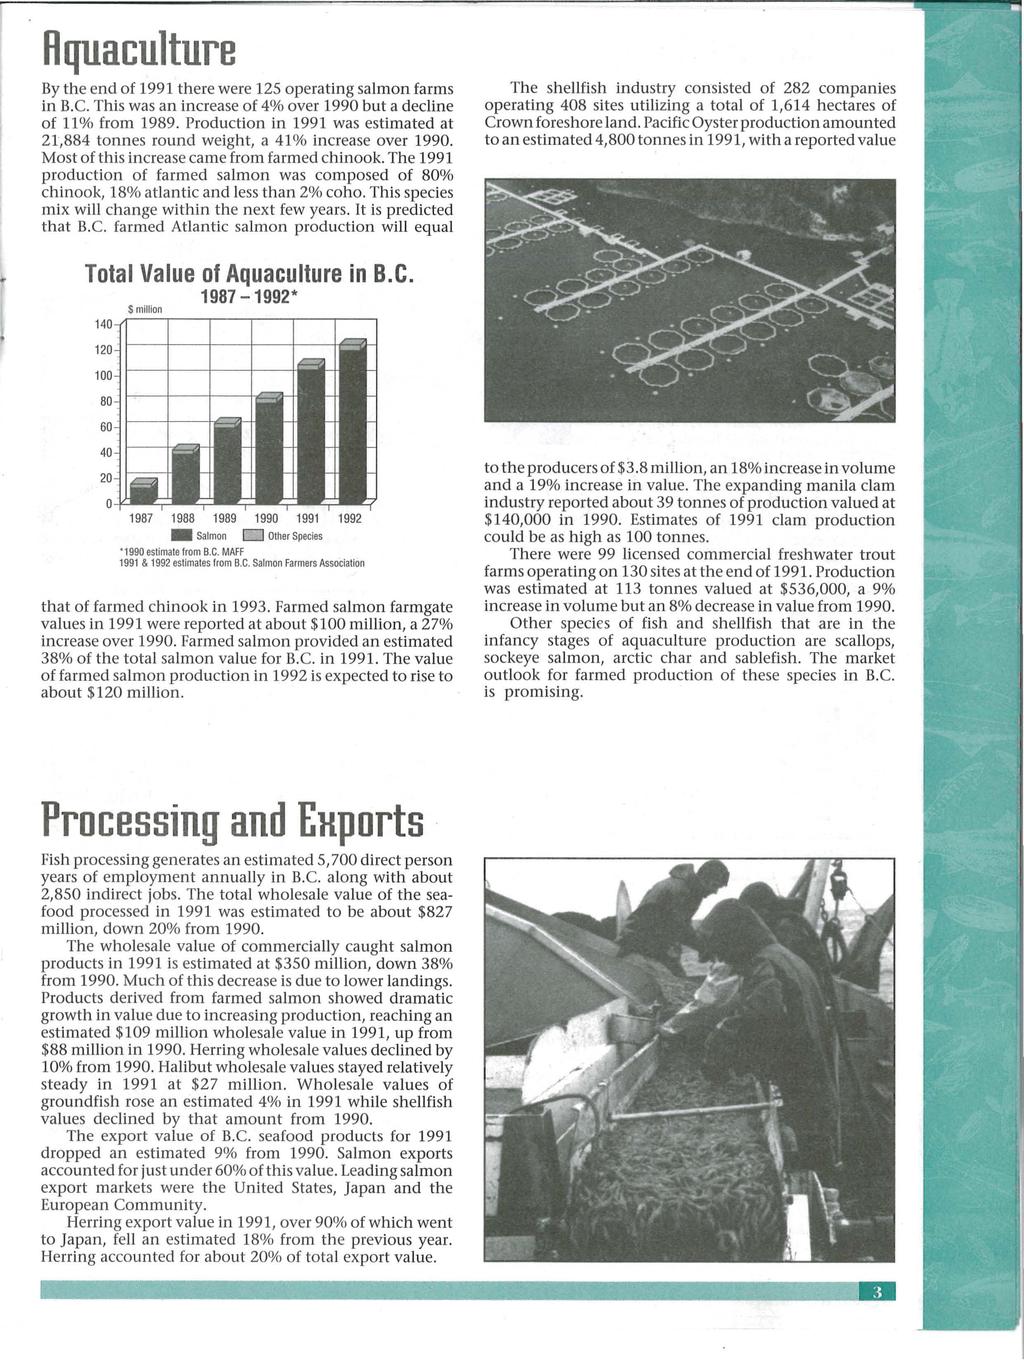 Aquaculture By the end of 1991 there were 125 operating salmon farms in B.C. This was an increase of 4% over 1990 but a decline of 11% from 1989.